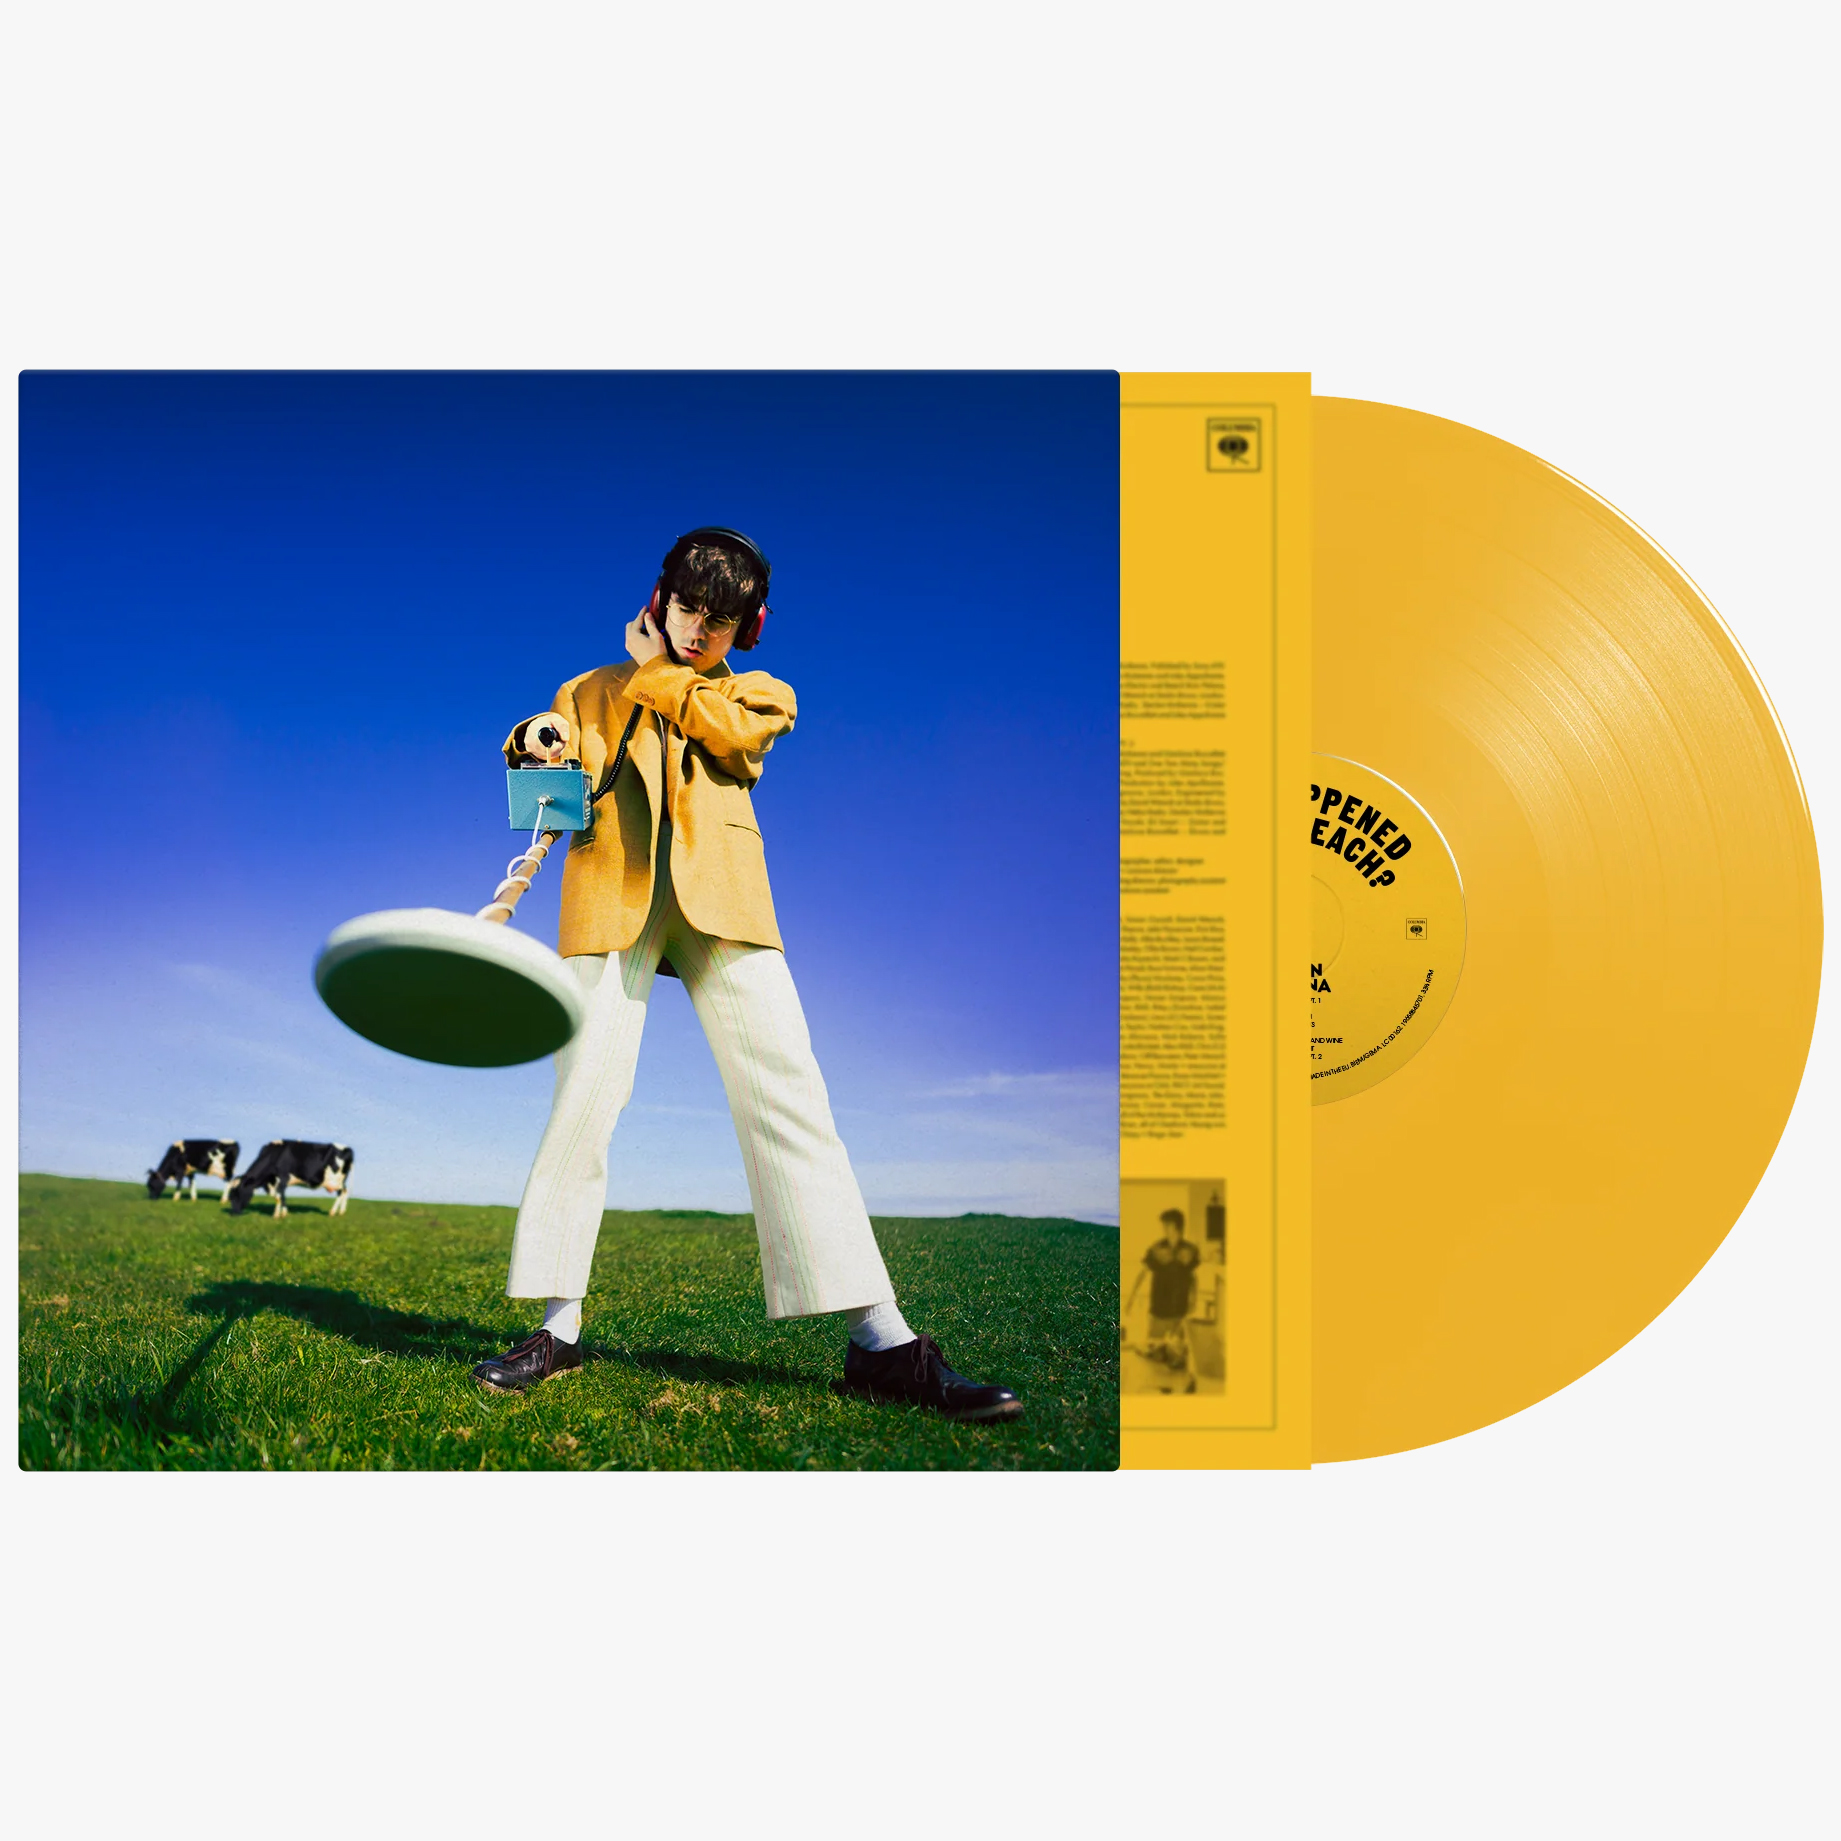 What Happened To The Beach (Yellow Edition) (Vinyl)